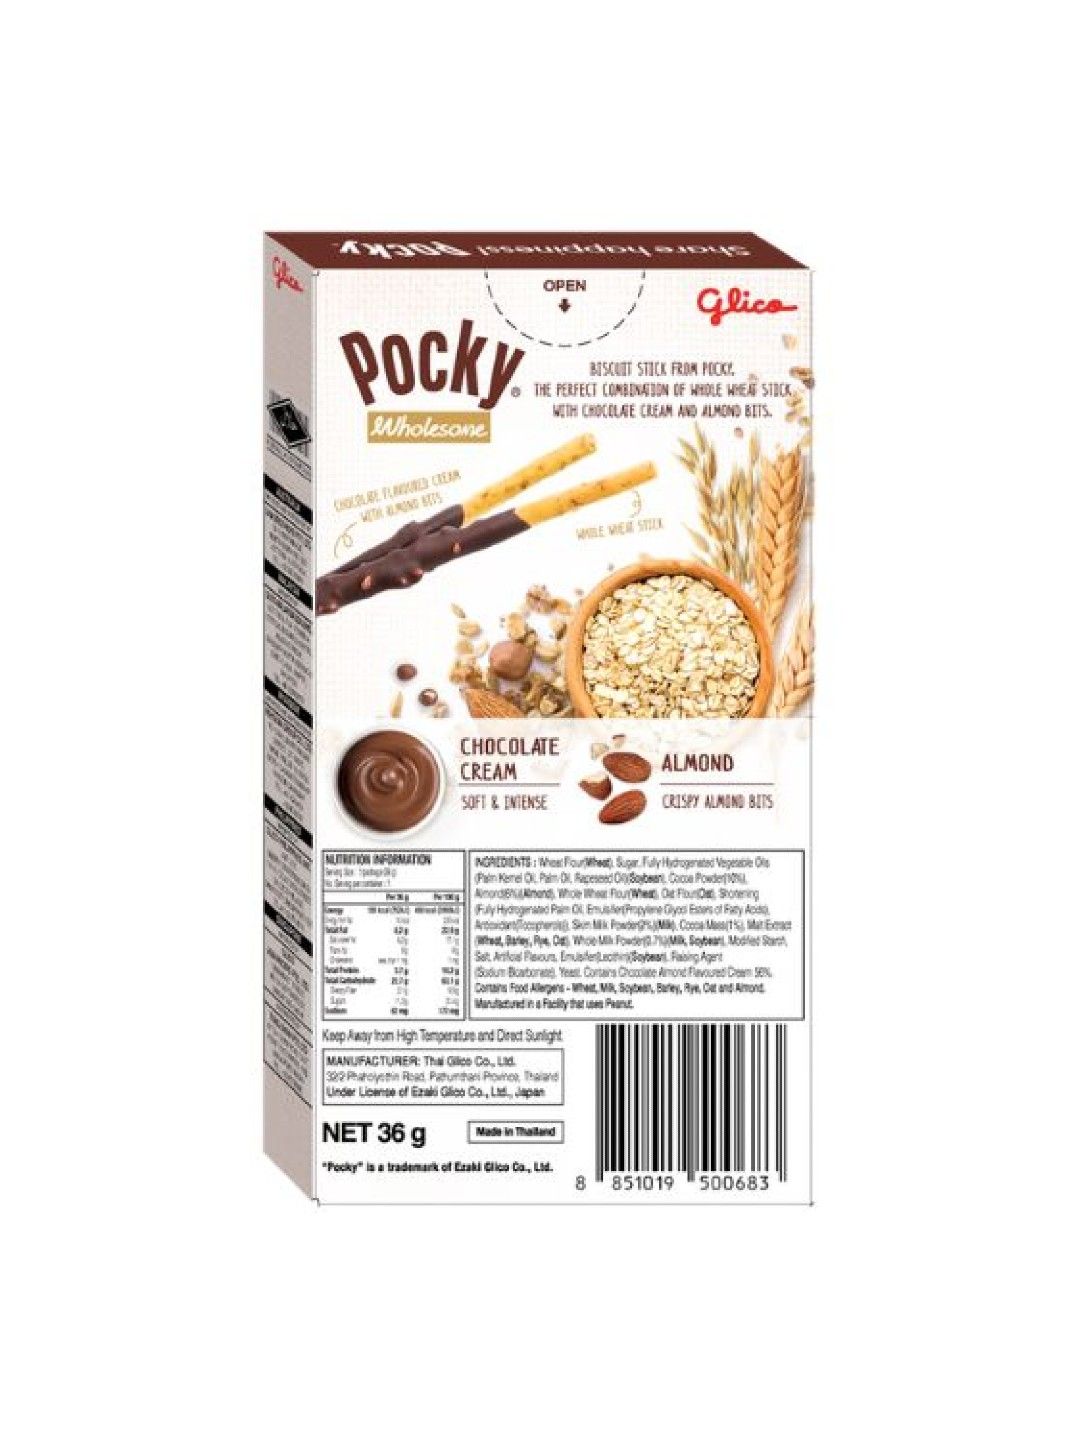 Pocky Wholesome Chocolate Almonds Biscuit Sticks (Bundle of 5) (No Color- Image 2)